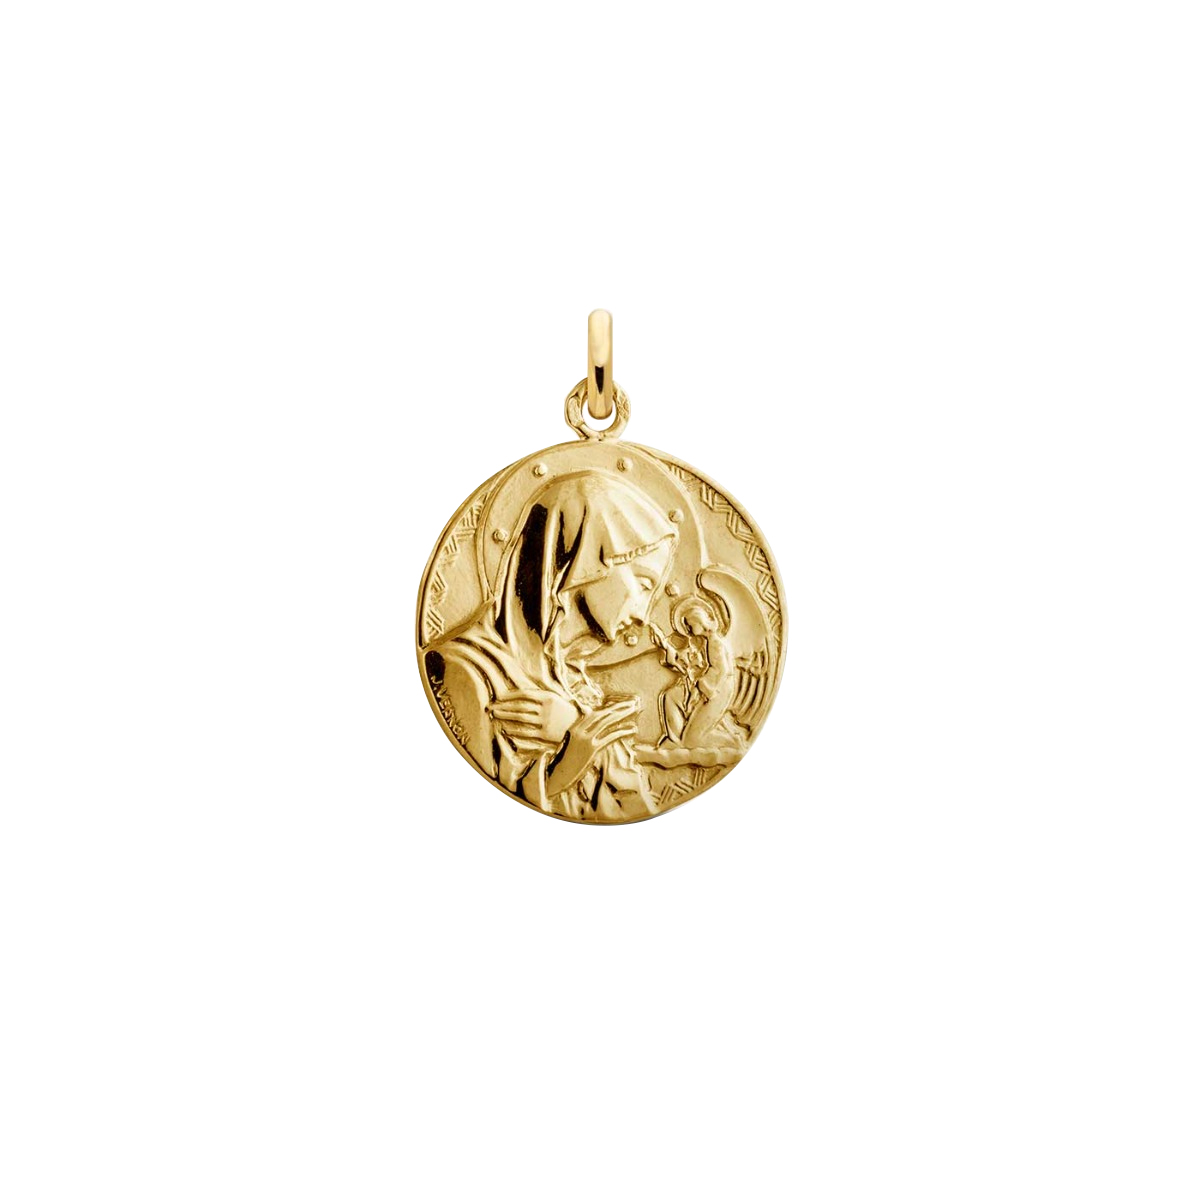 ARTHUS BERTRAND Annunciation medal yellow gold| Lepage